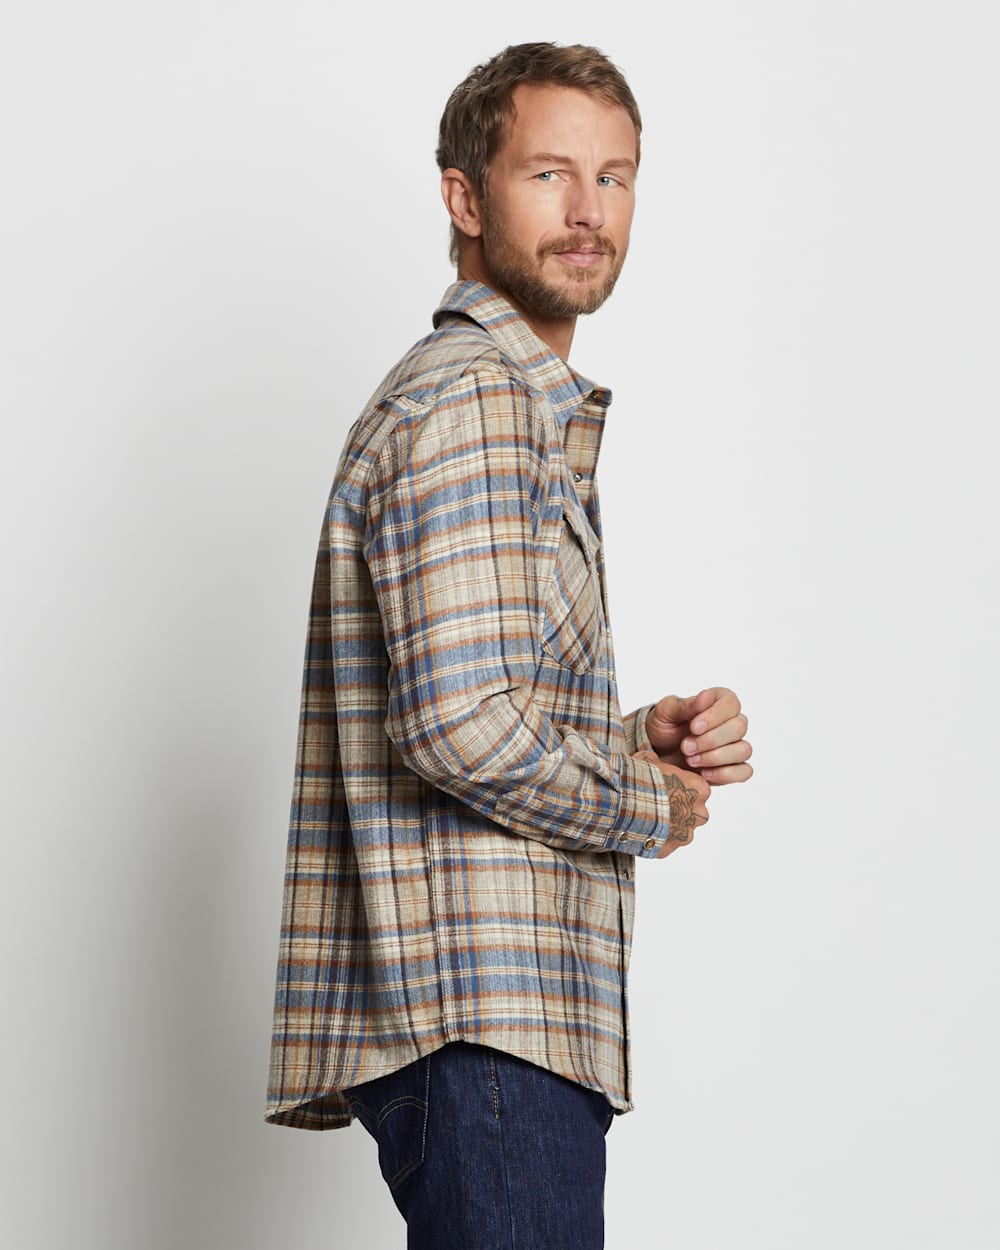 ALTERNATE VIEW OF MEN'S PLAID SNAP-FRONT WESTERN CANYON SHIRT IN BROWN/BLUE GOLD MULTI image number 4